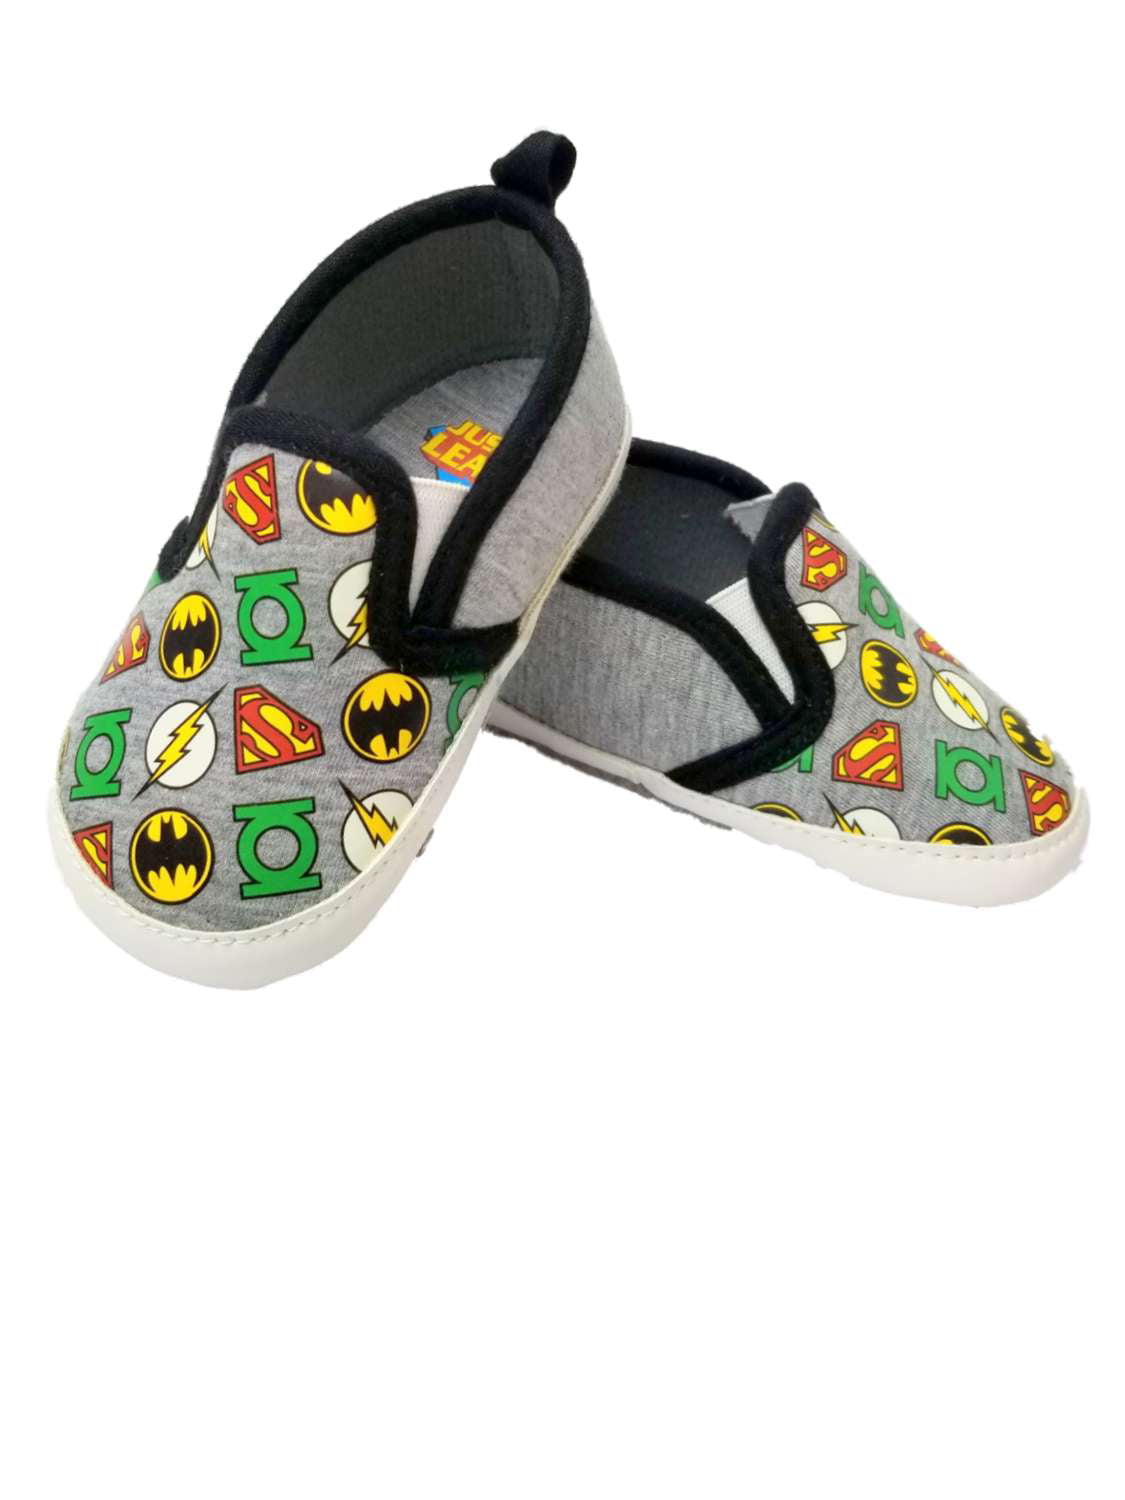 justice slippers